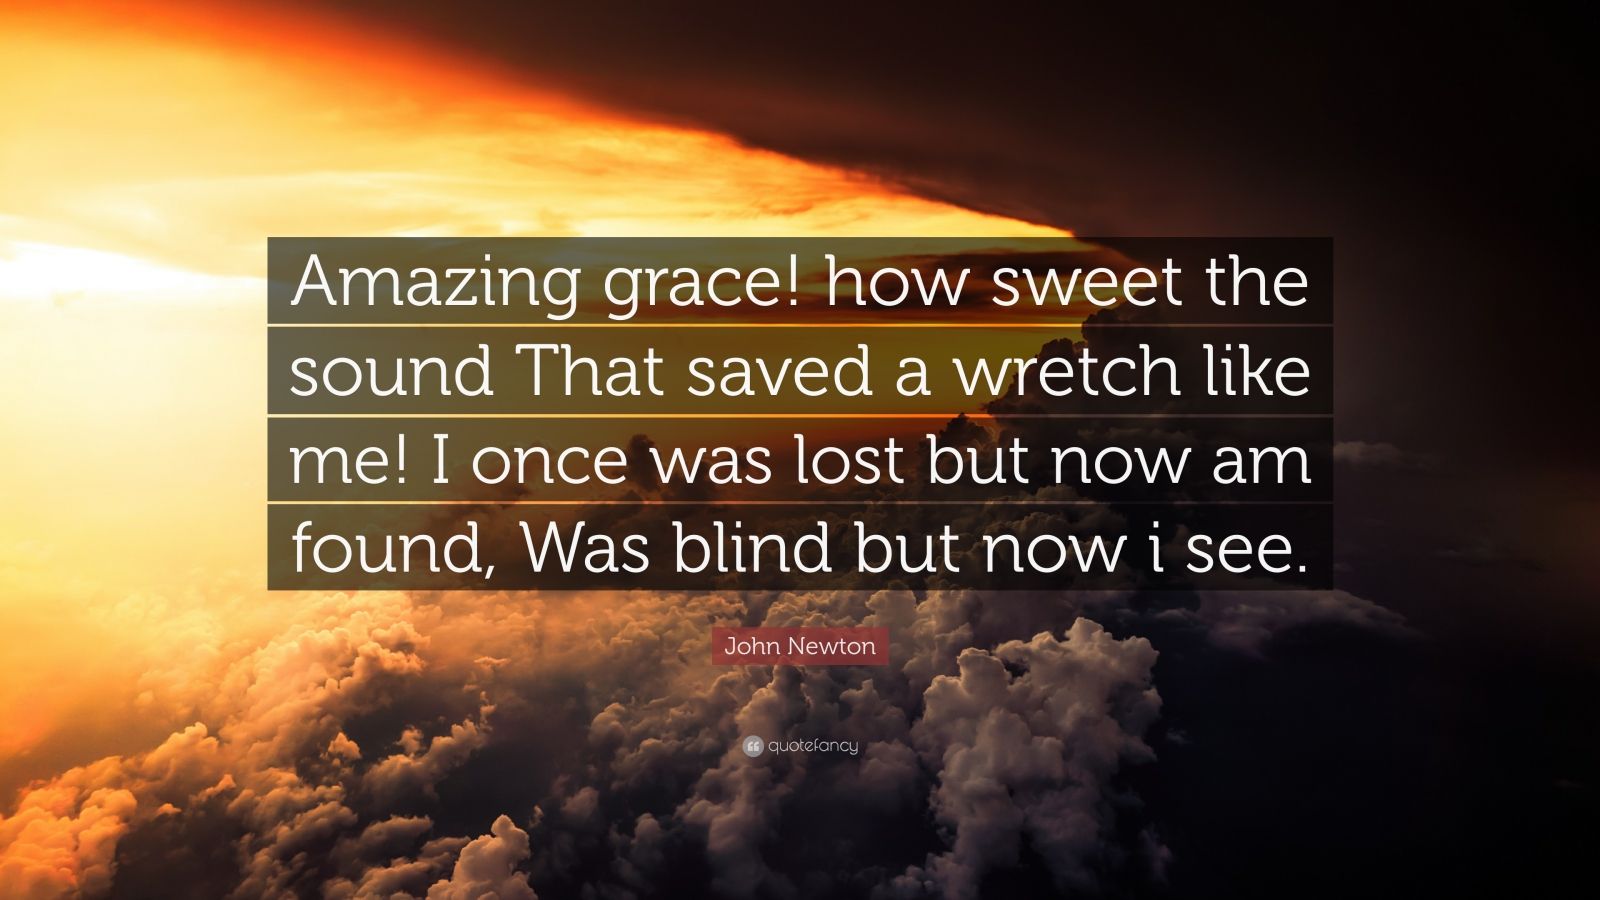 John Newton Quote: “Amazing grace! how sweet the sound That saved a wretch like me! I once was lost but now am found, Was blind but now i se.”